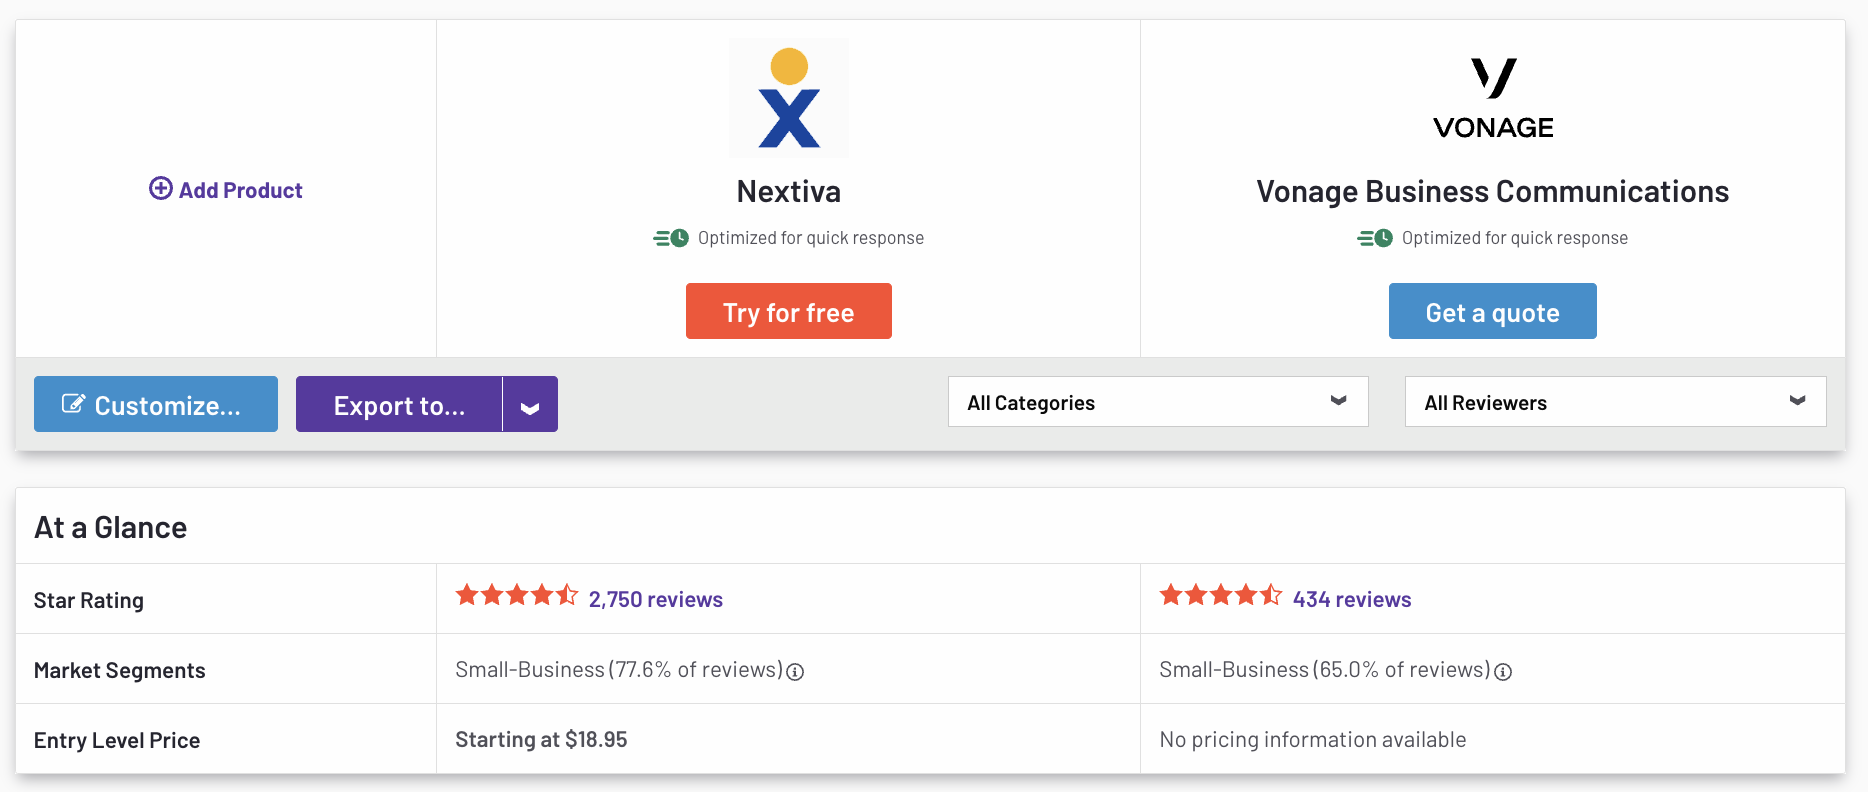 A side-by-side comparison of Nextiva and Vonage (via G2)